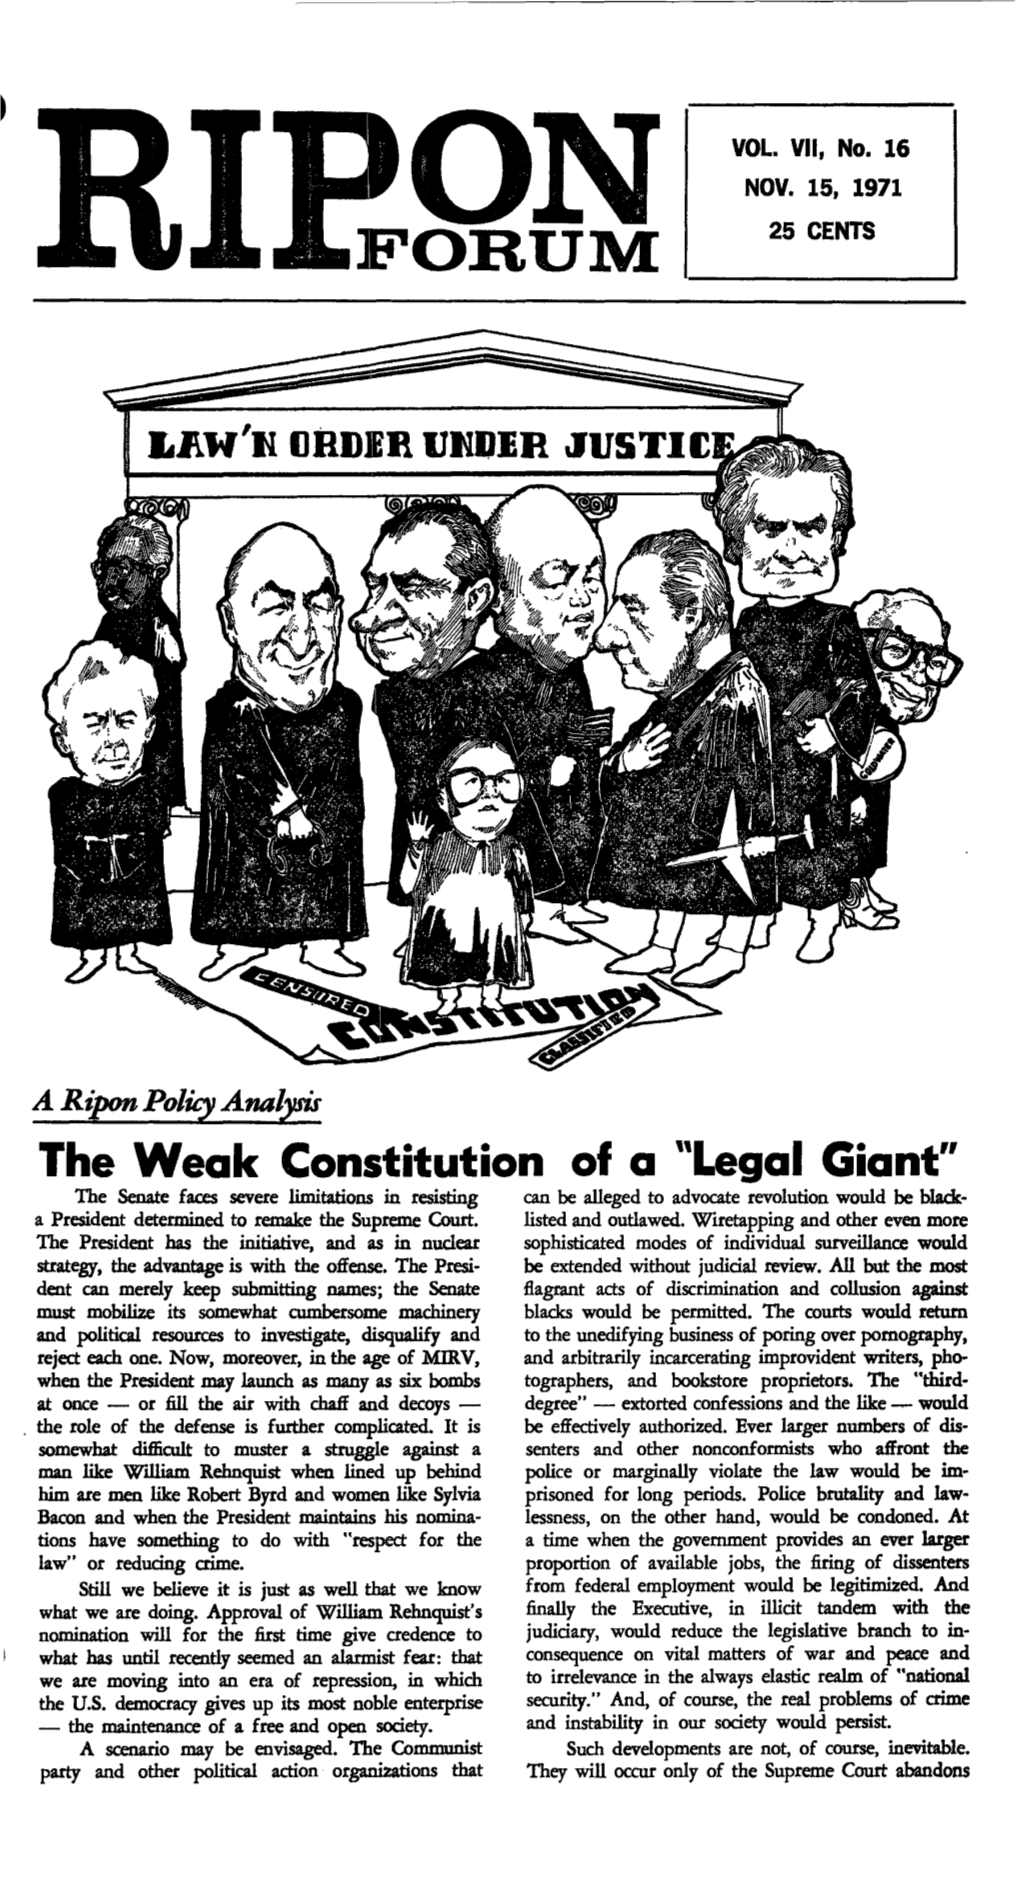 The Weak Constitution of a "Legal Giant"